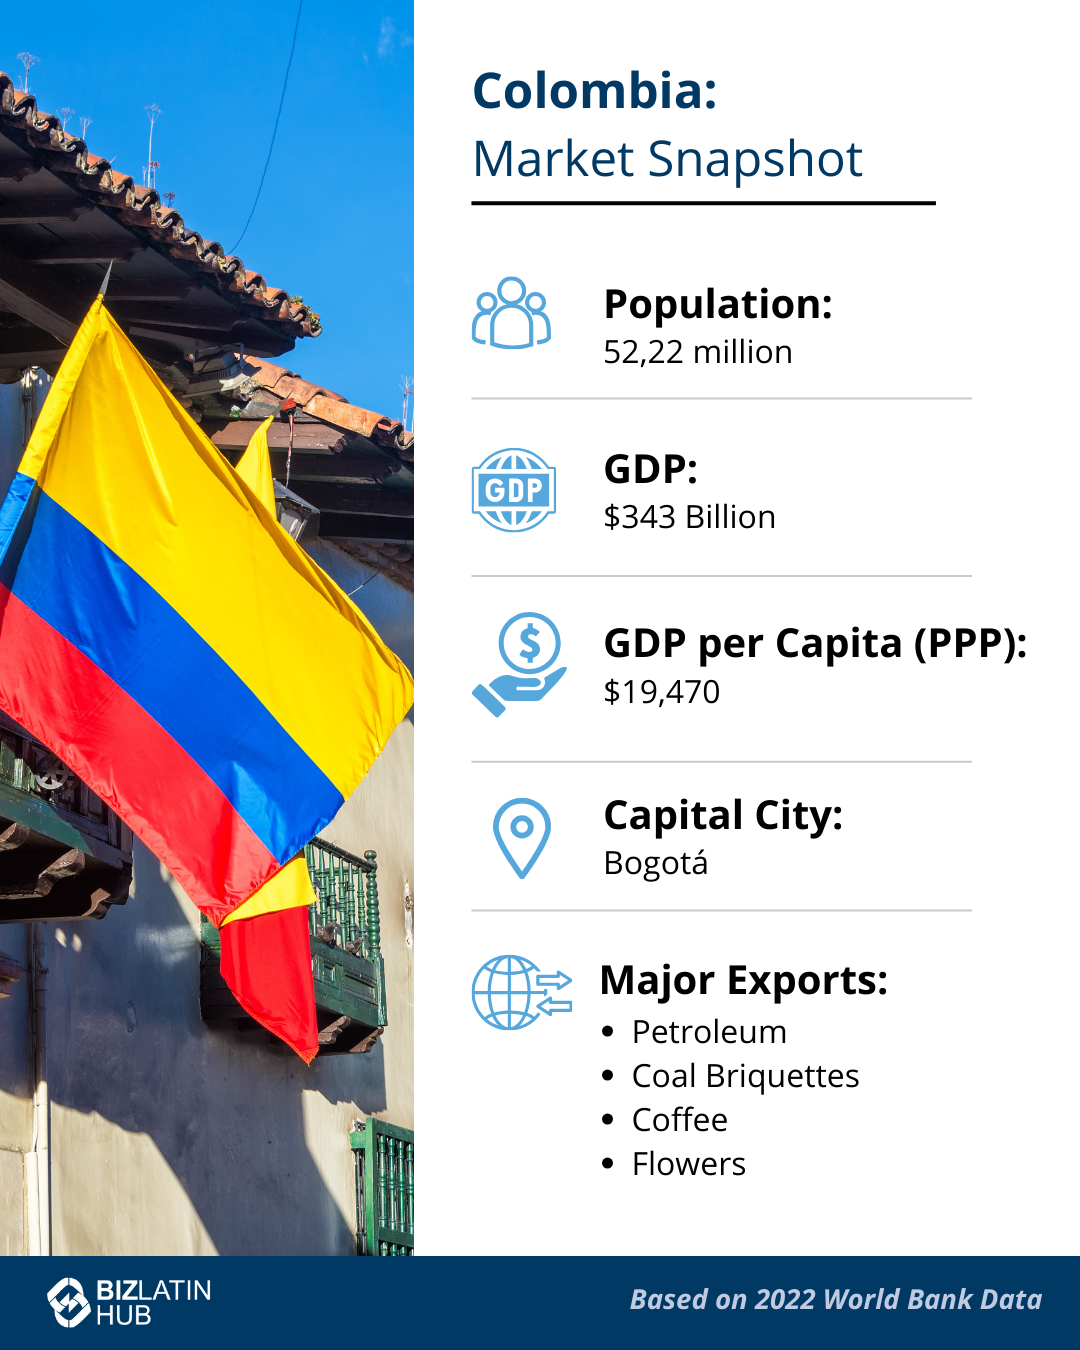 Infographic titled "Colombia: Market Snapshot" with national flag. Text indicates a population of 52.22 million, GDP of $343 billion, GDP per capita (PPP) of $19,470, and capital city Bogotá. Major exports include petroleum, coal briquettes, coffee, and flowers—essential for businesses considering a corporate bank account in Colombia.